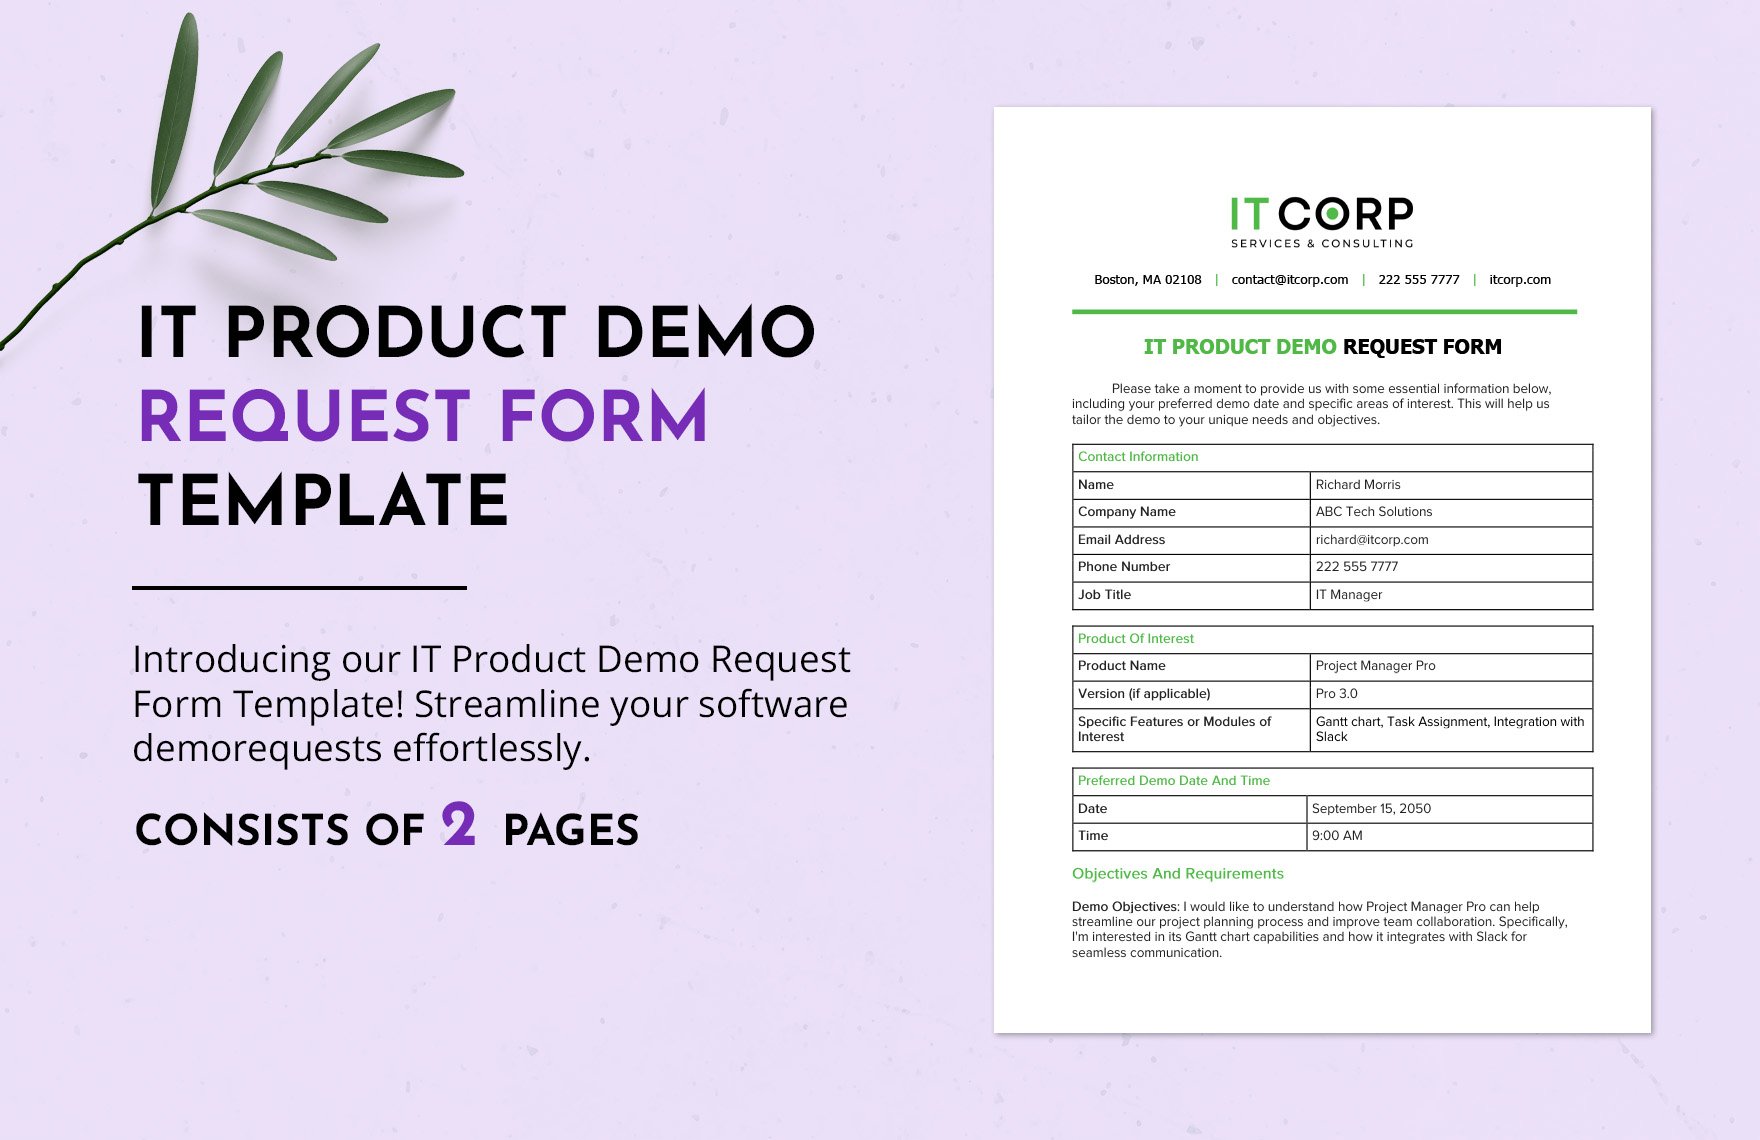 IT Product Demo Request Form Template